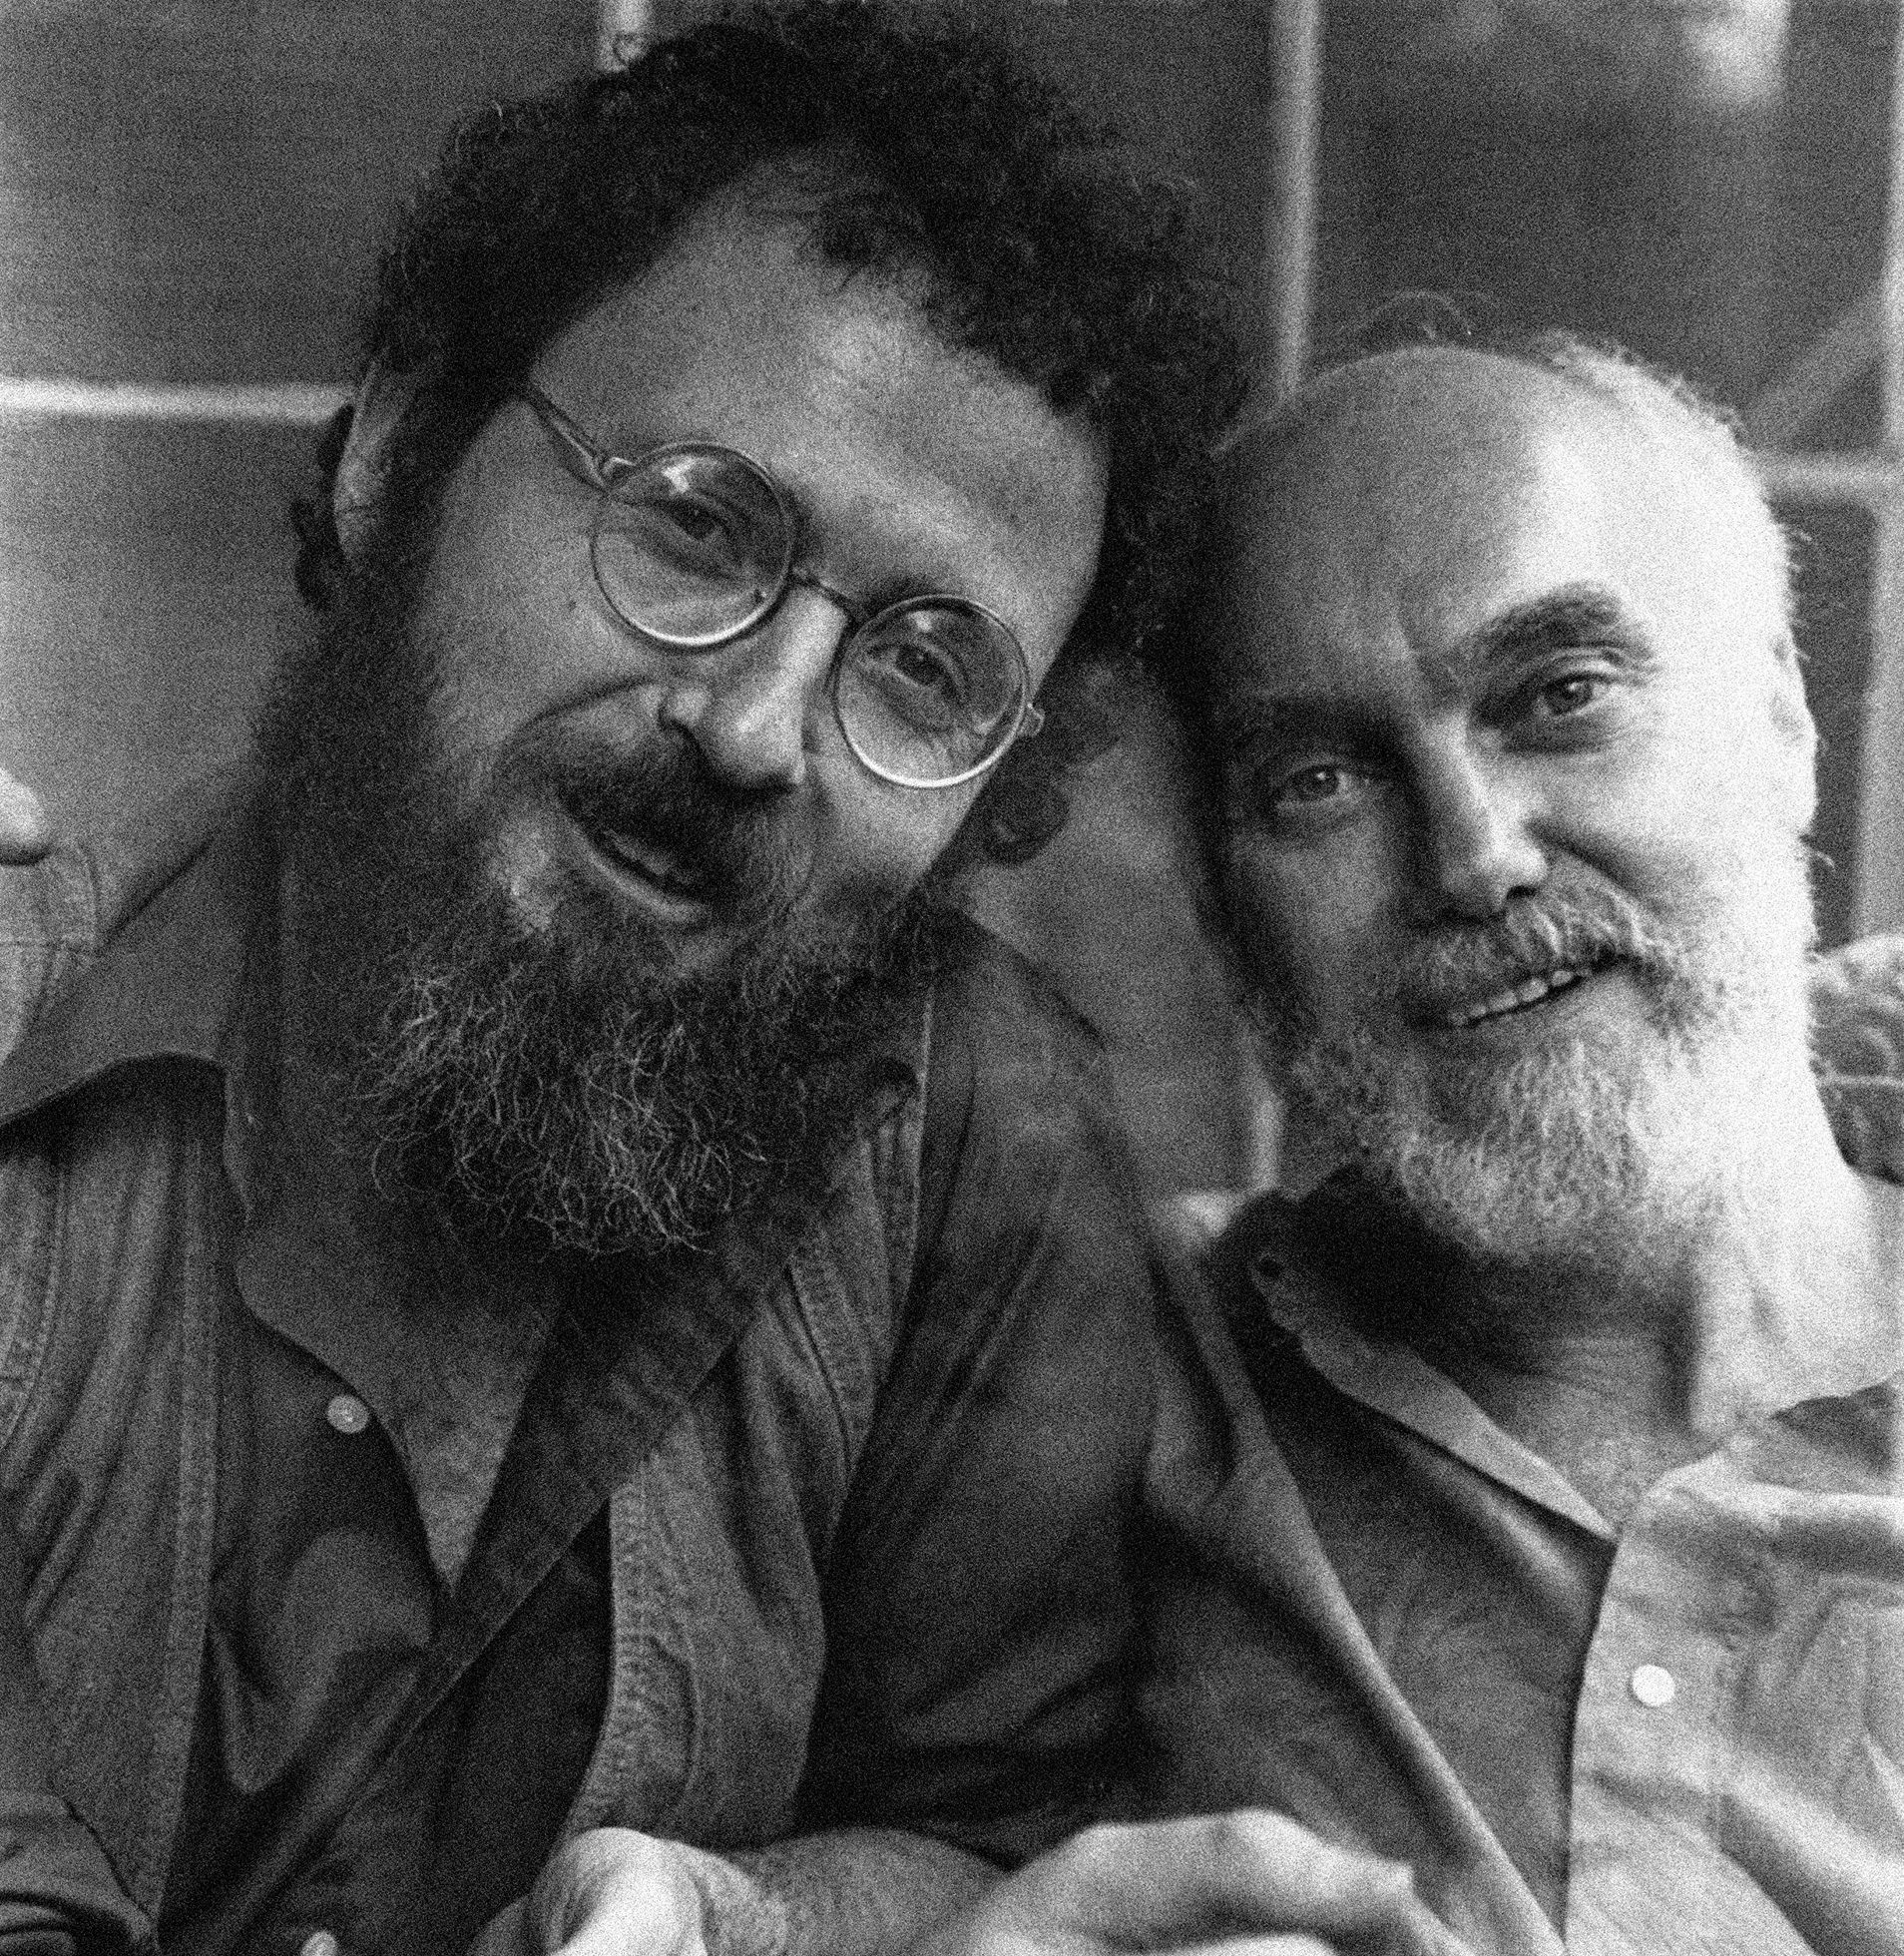 Sy Safransky and Ram Dass sit side-by-side and look into the camera.